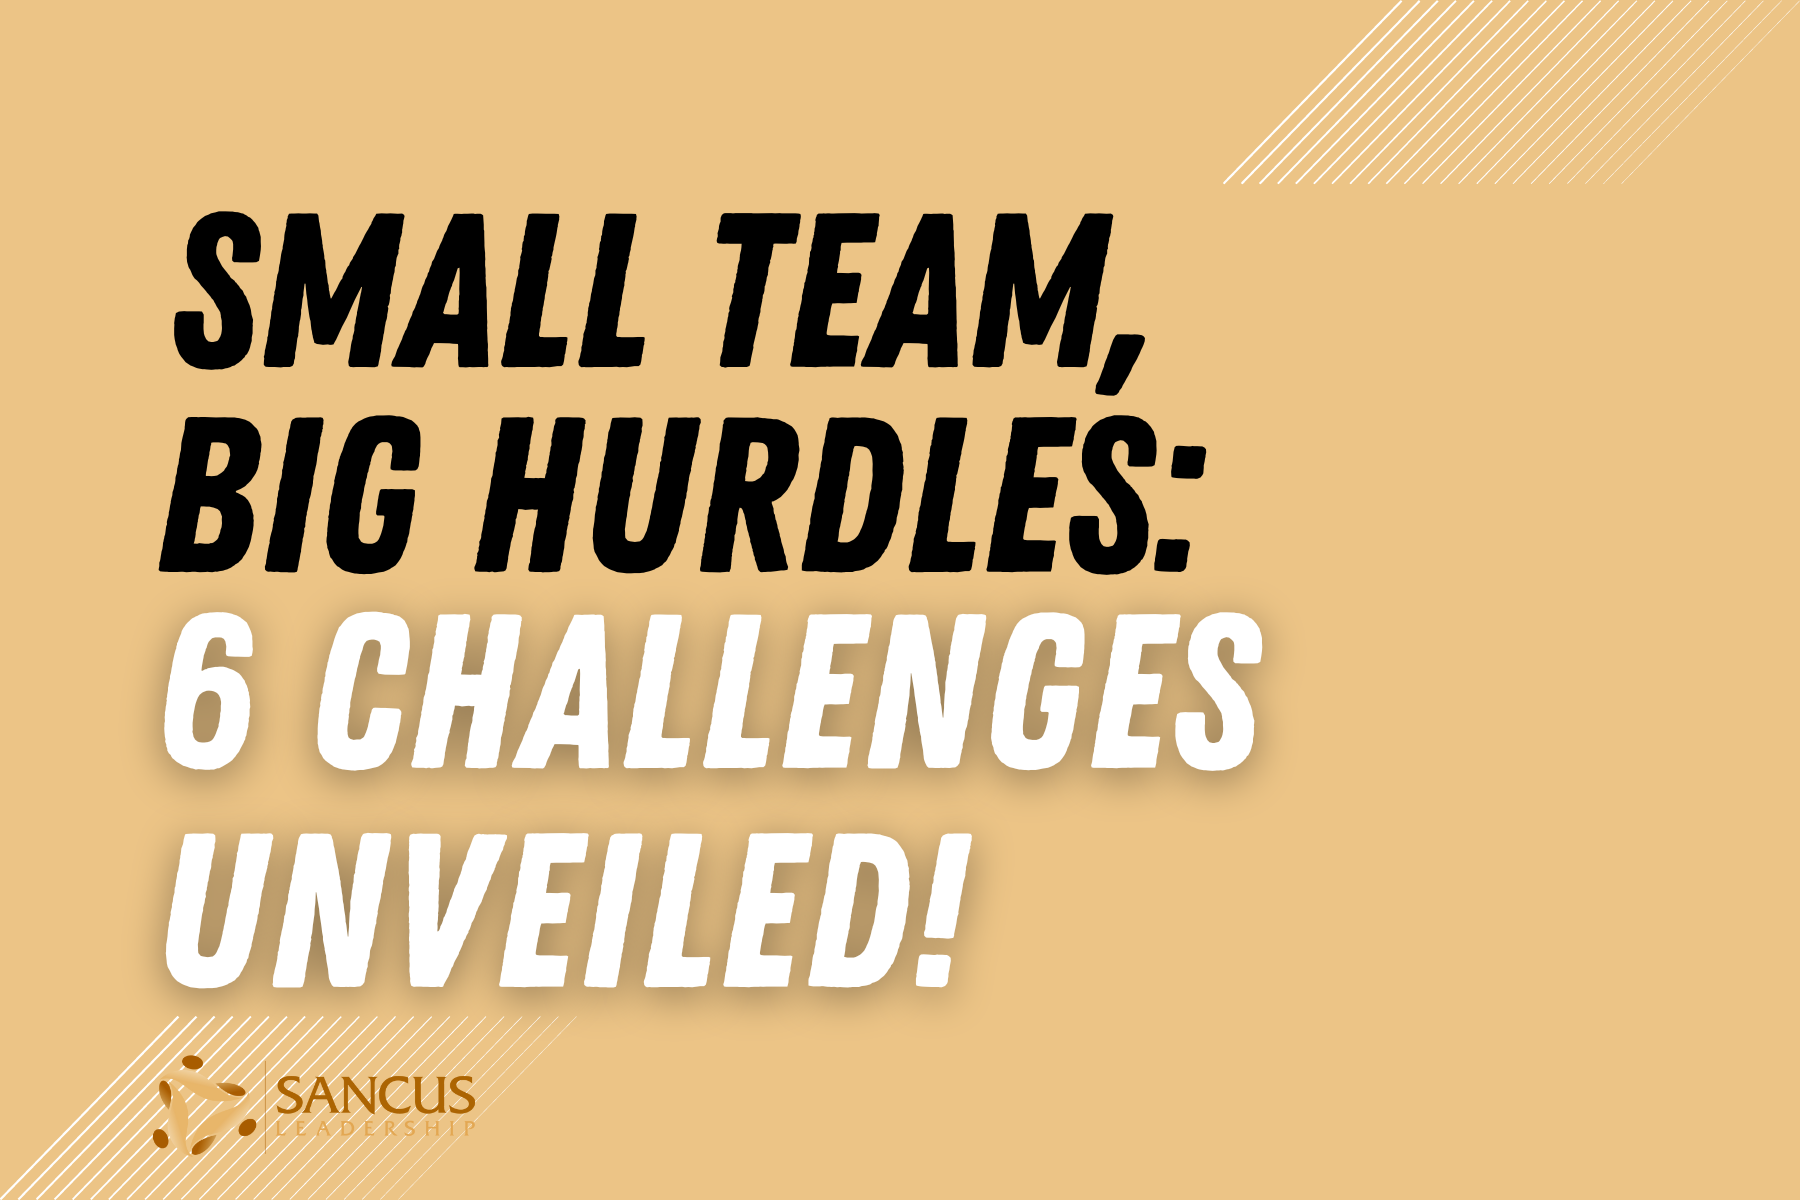 6 Challenges of Small Team Leaders